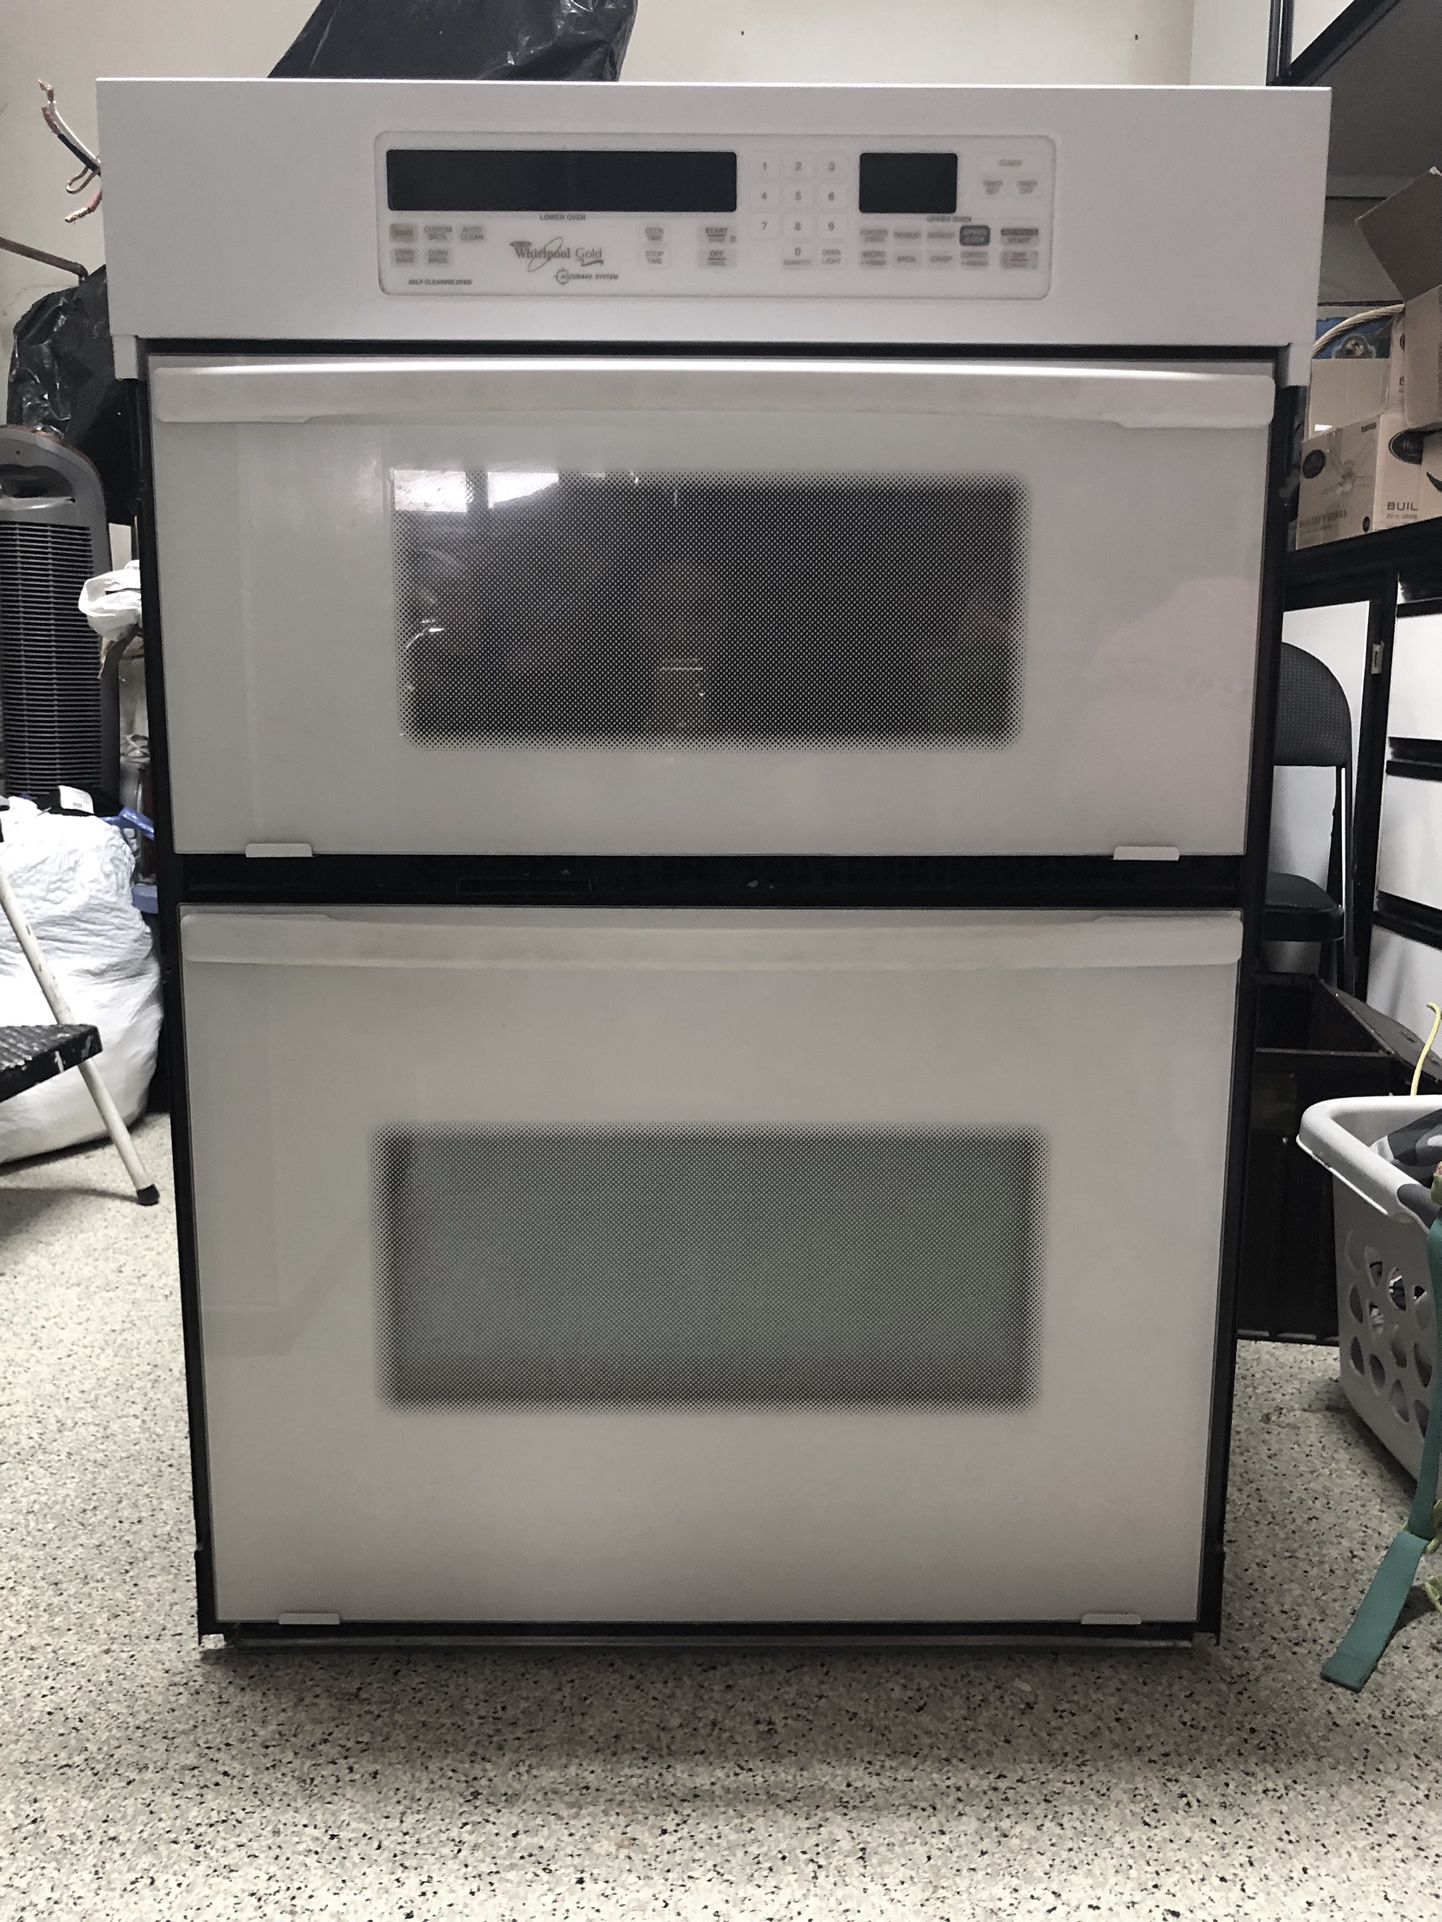 Free Wall Oven And Cooktop